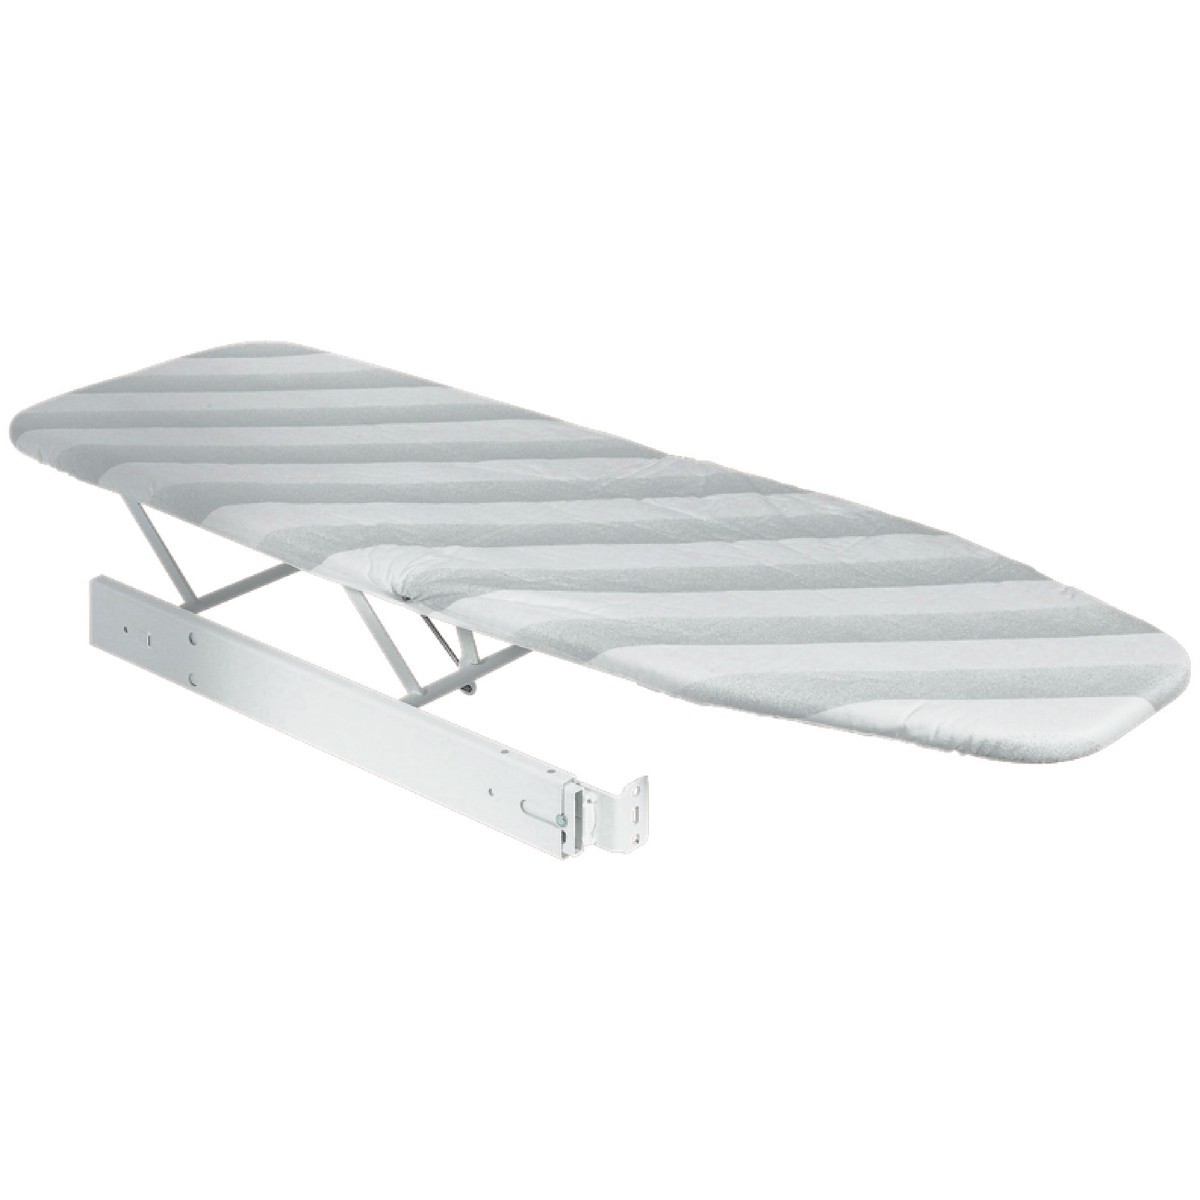 How To Close An Ironing Board Without Lever